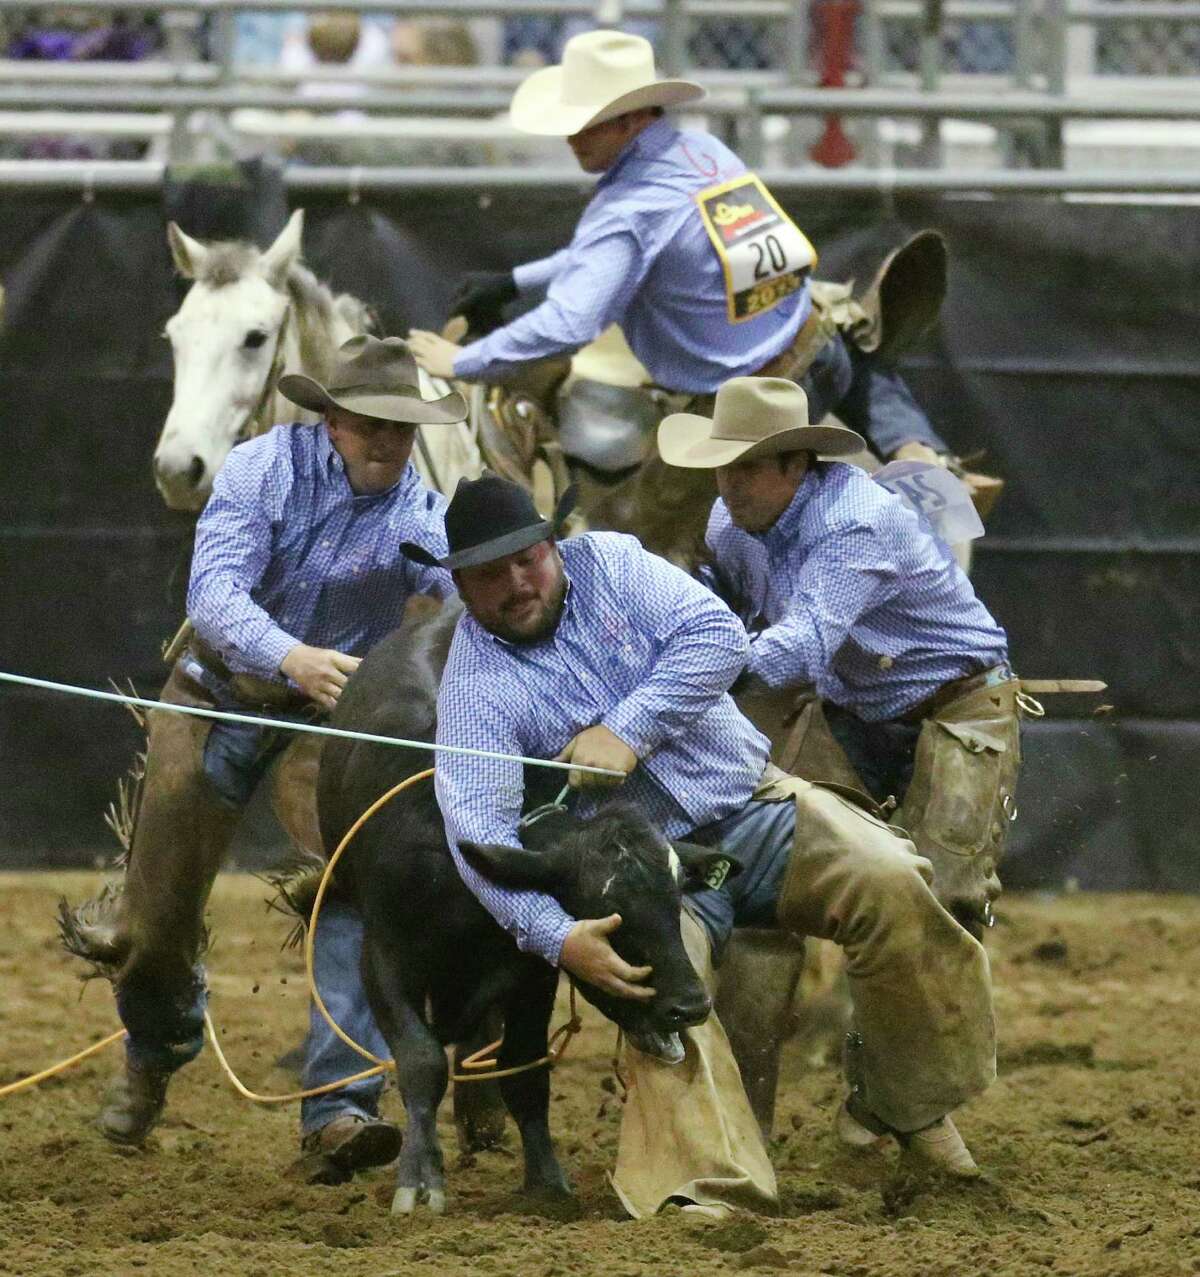 Ranch Rodeo tests everyday skills